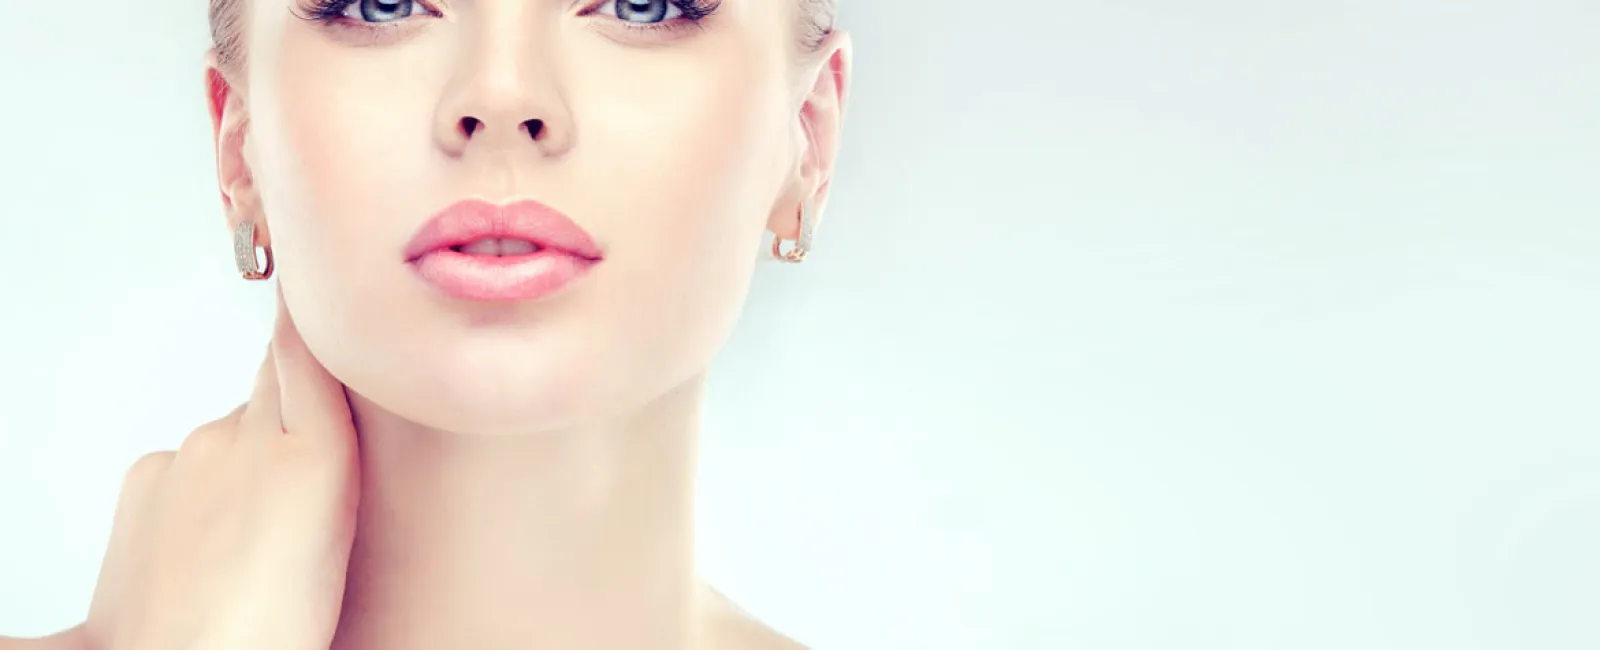 10 Myths About Face and Neck Lifts